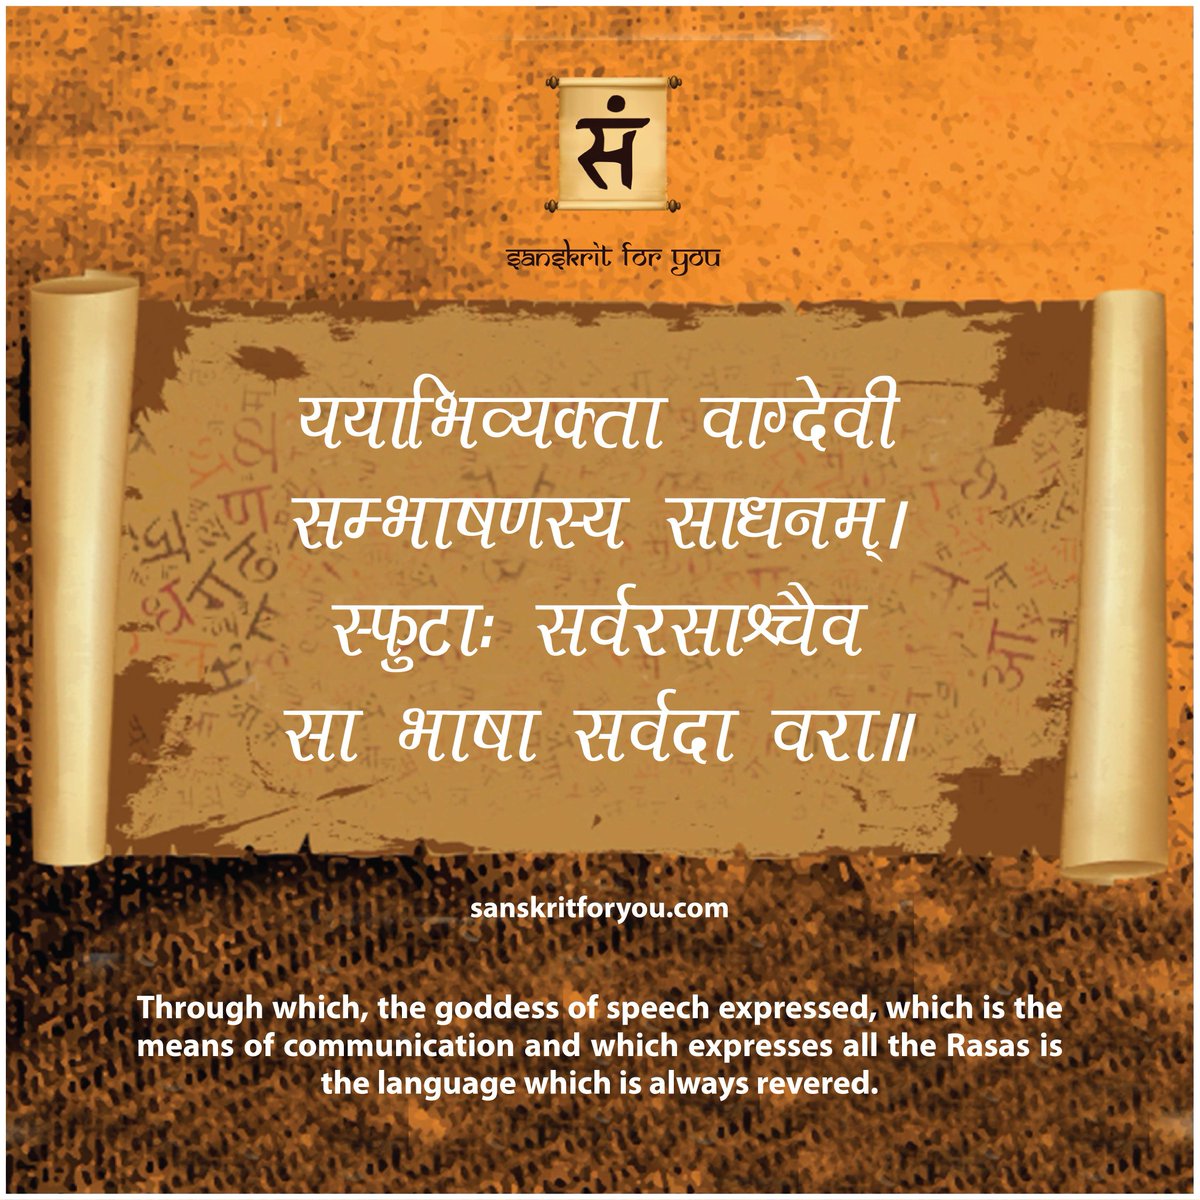 All the languages are beautiful 😄
Be proud of yours, and other's as well!😇
मराठीभाषा दिनस्य शुभाशयाः 🙏

Shloka written by Ankit Rawal 

#sanskritforyou #sanskritforall #language #marathi #marathibhasha #marathibhashadin #communication #sanskritlanguage #sanskritlearning